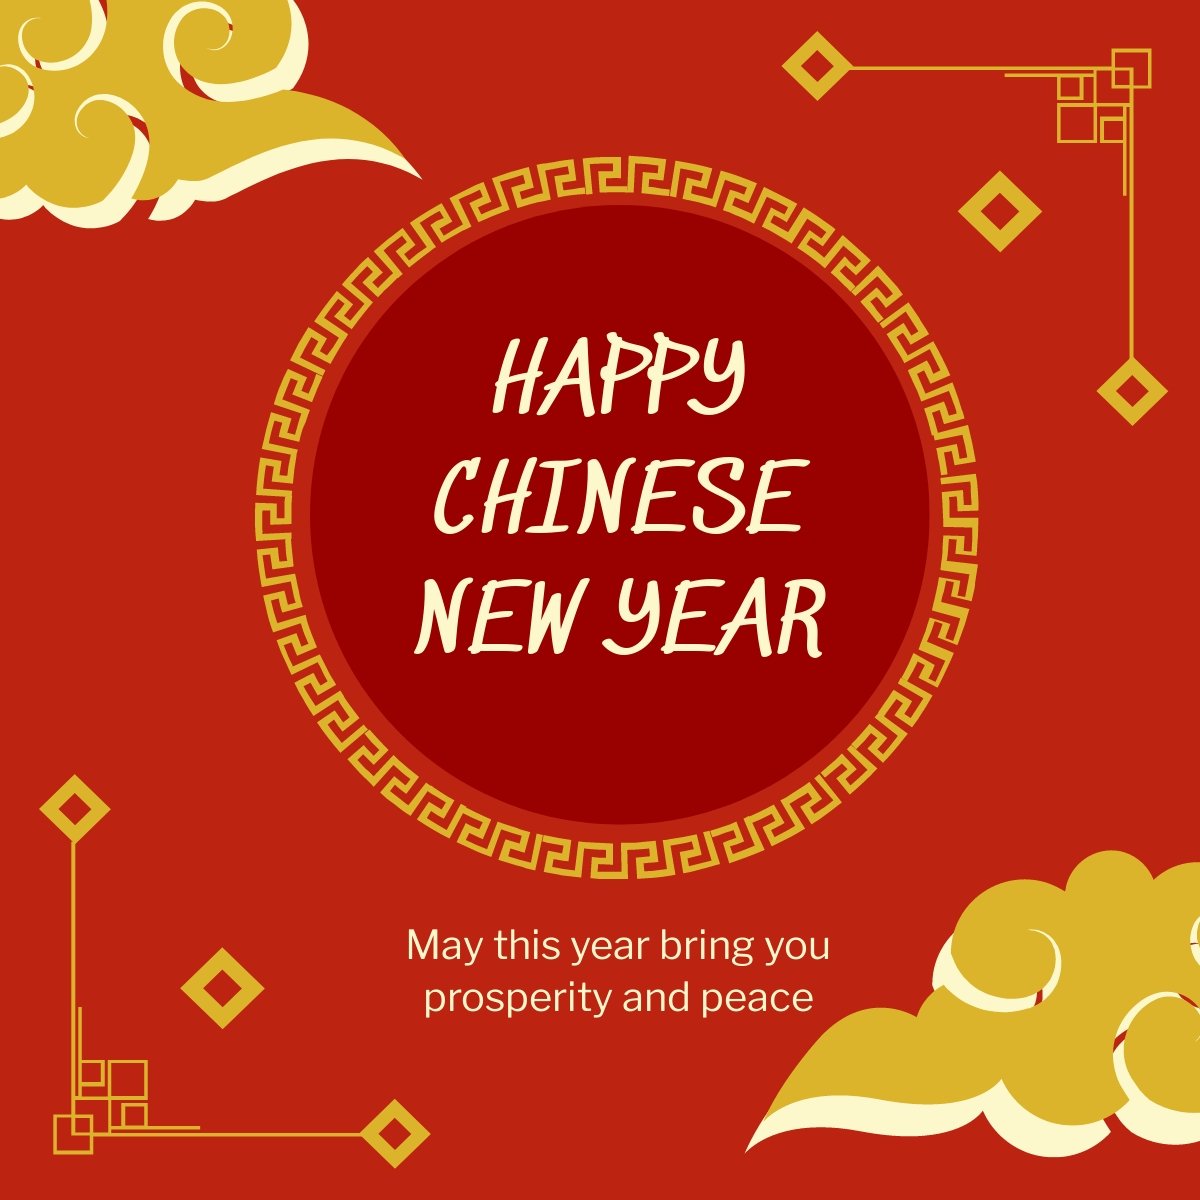 Free Vintage Chinese New Year Linkedin Post Template